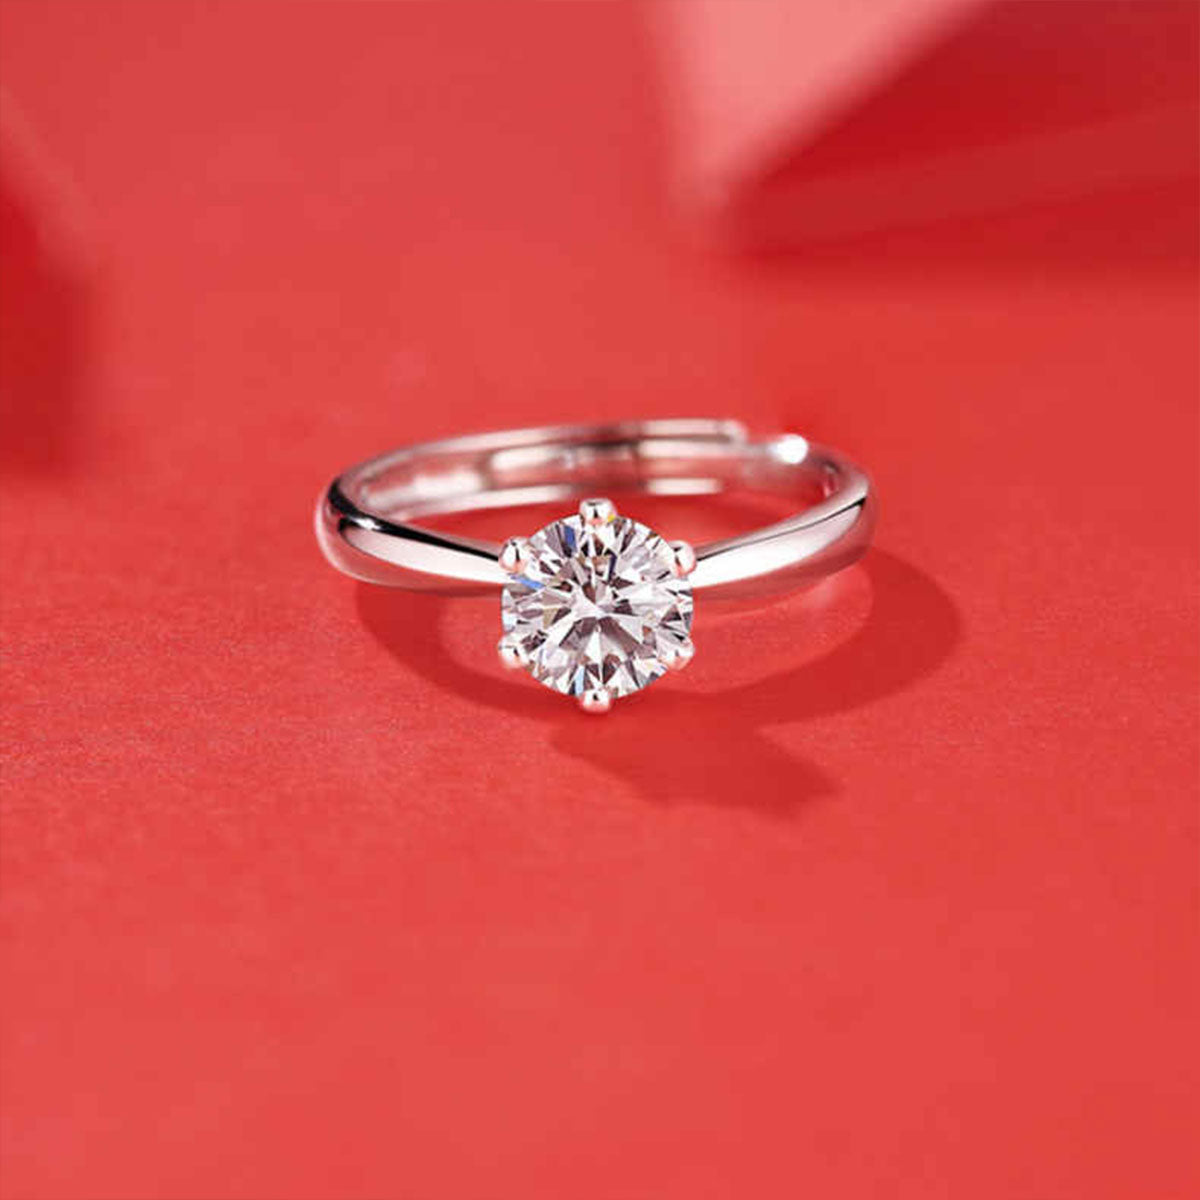 $5.99 Today: White Gold Prong Setting Round Cut Adjustable Moissanite Ring